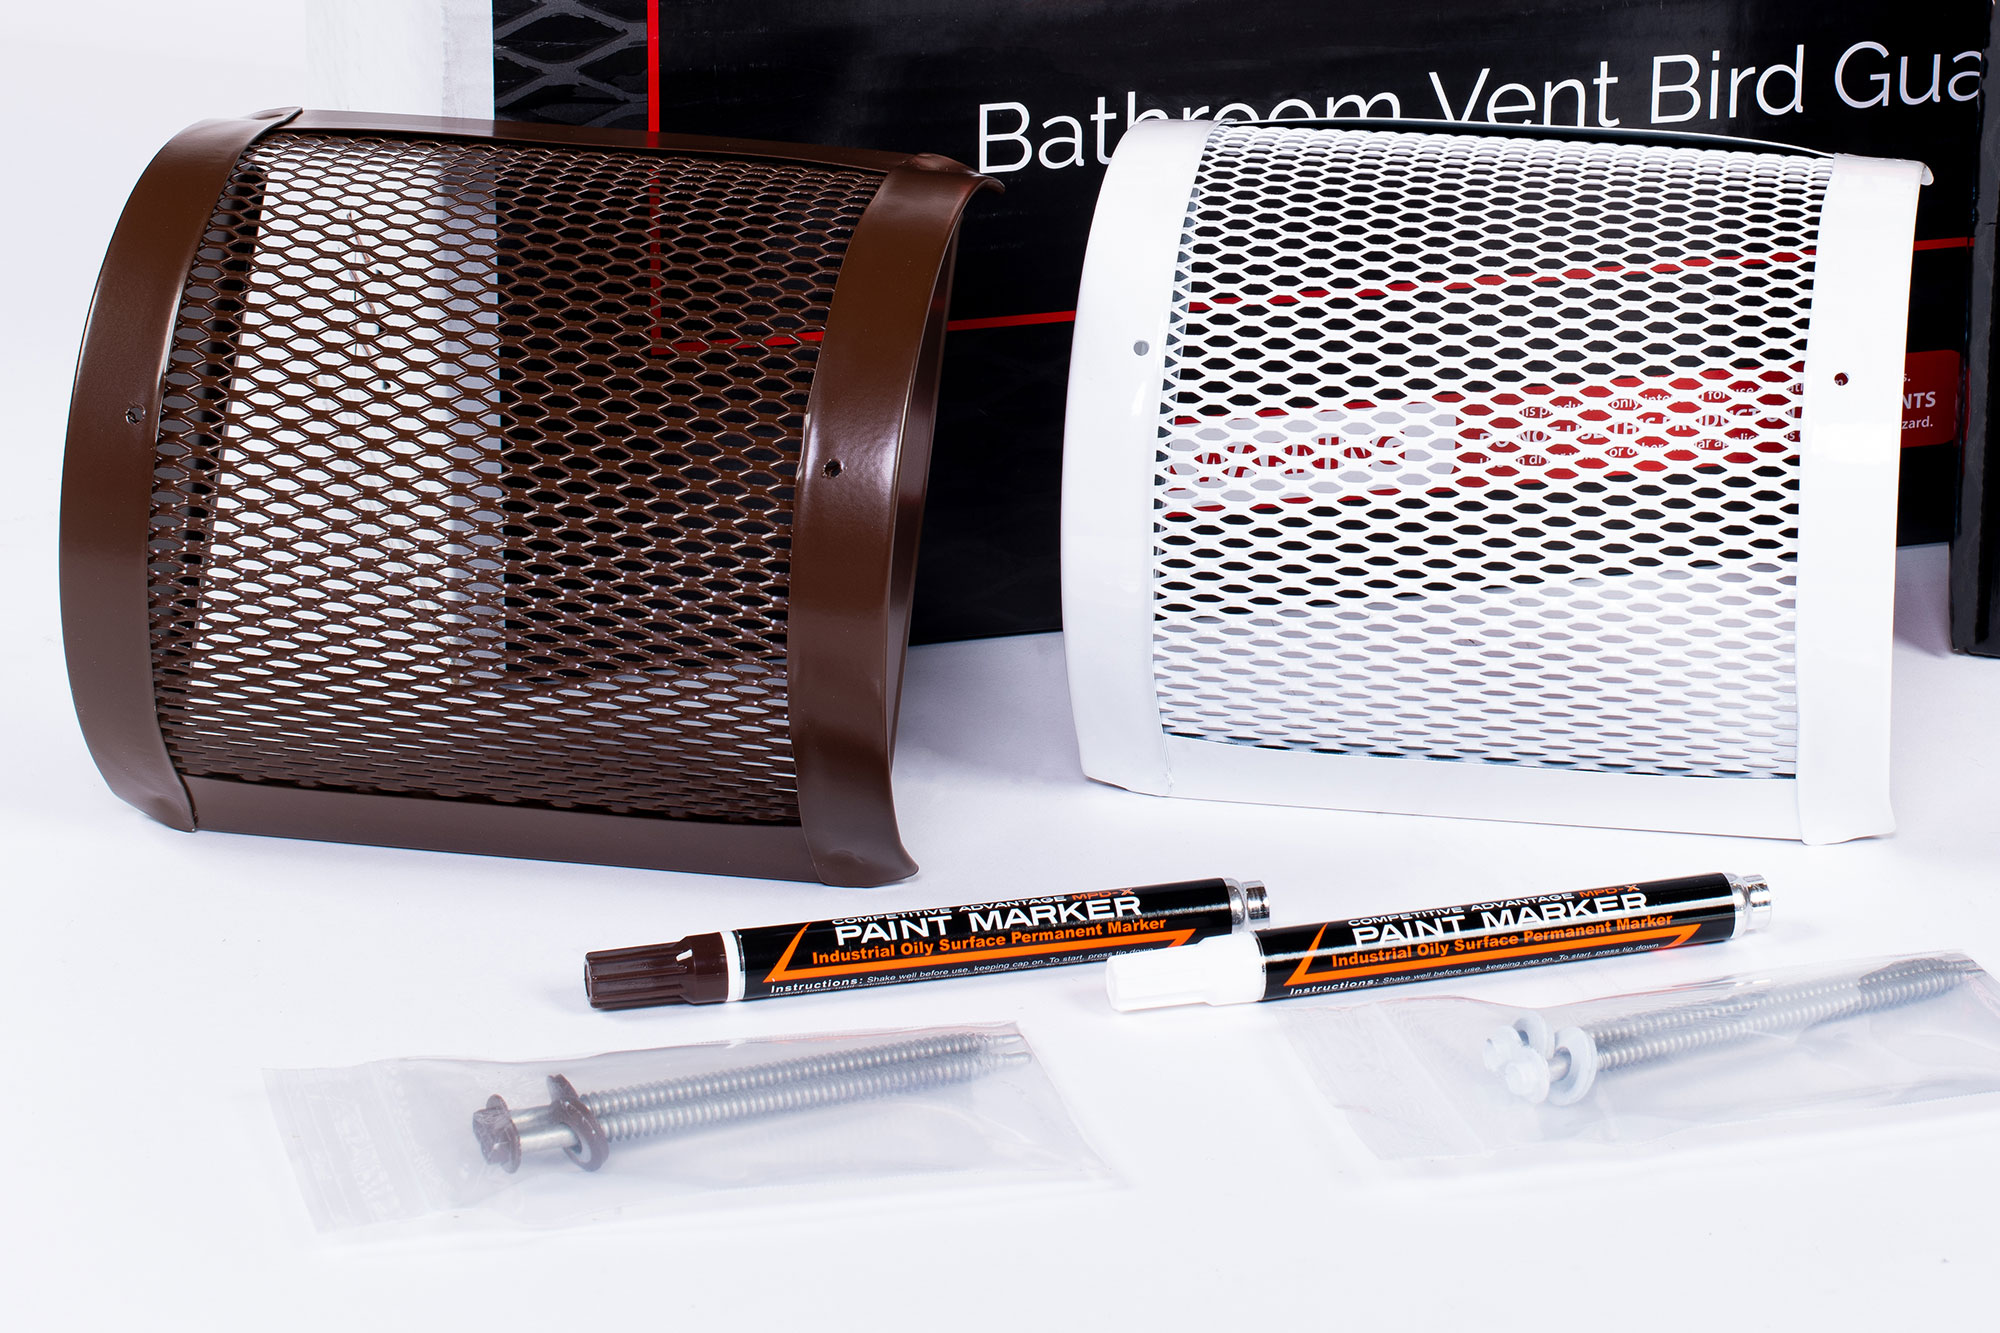 XclusionPro® Bathroom Vent Guard (BVG) Kit including brown and white guards, paint markers, and screws for installation